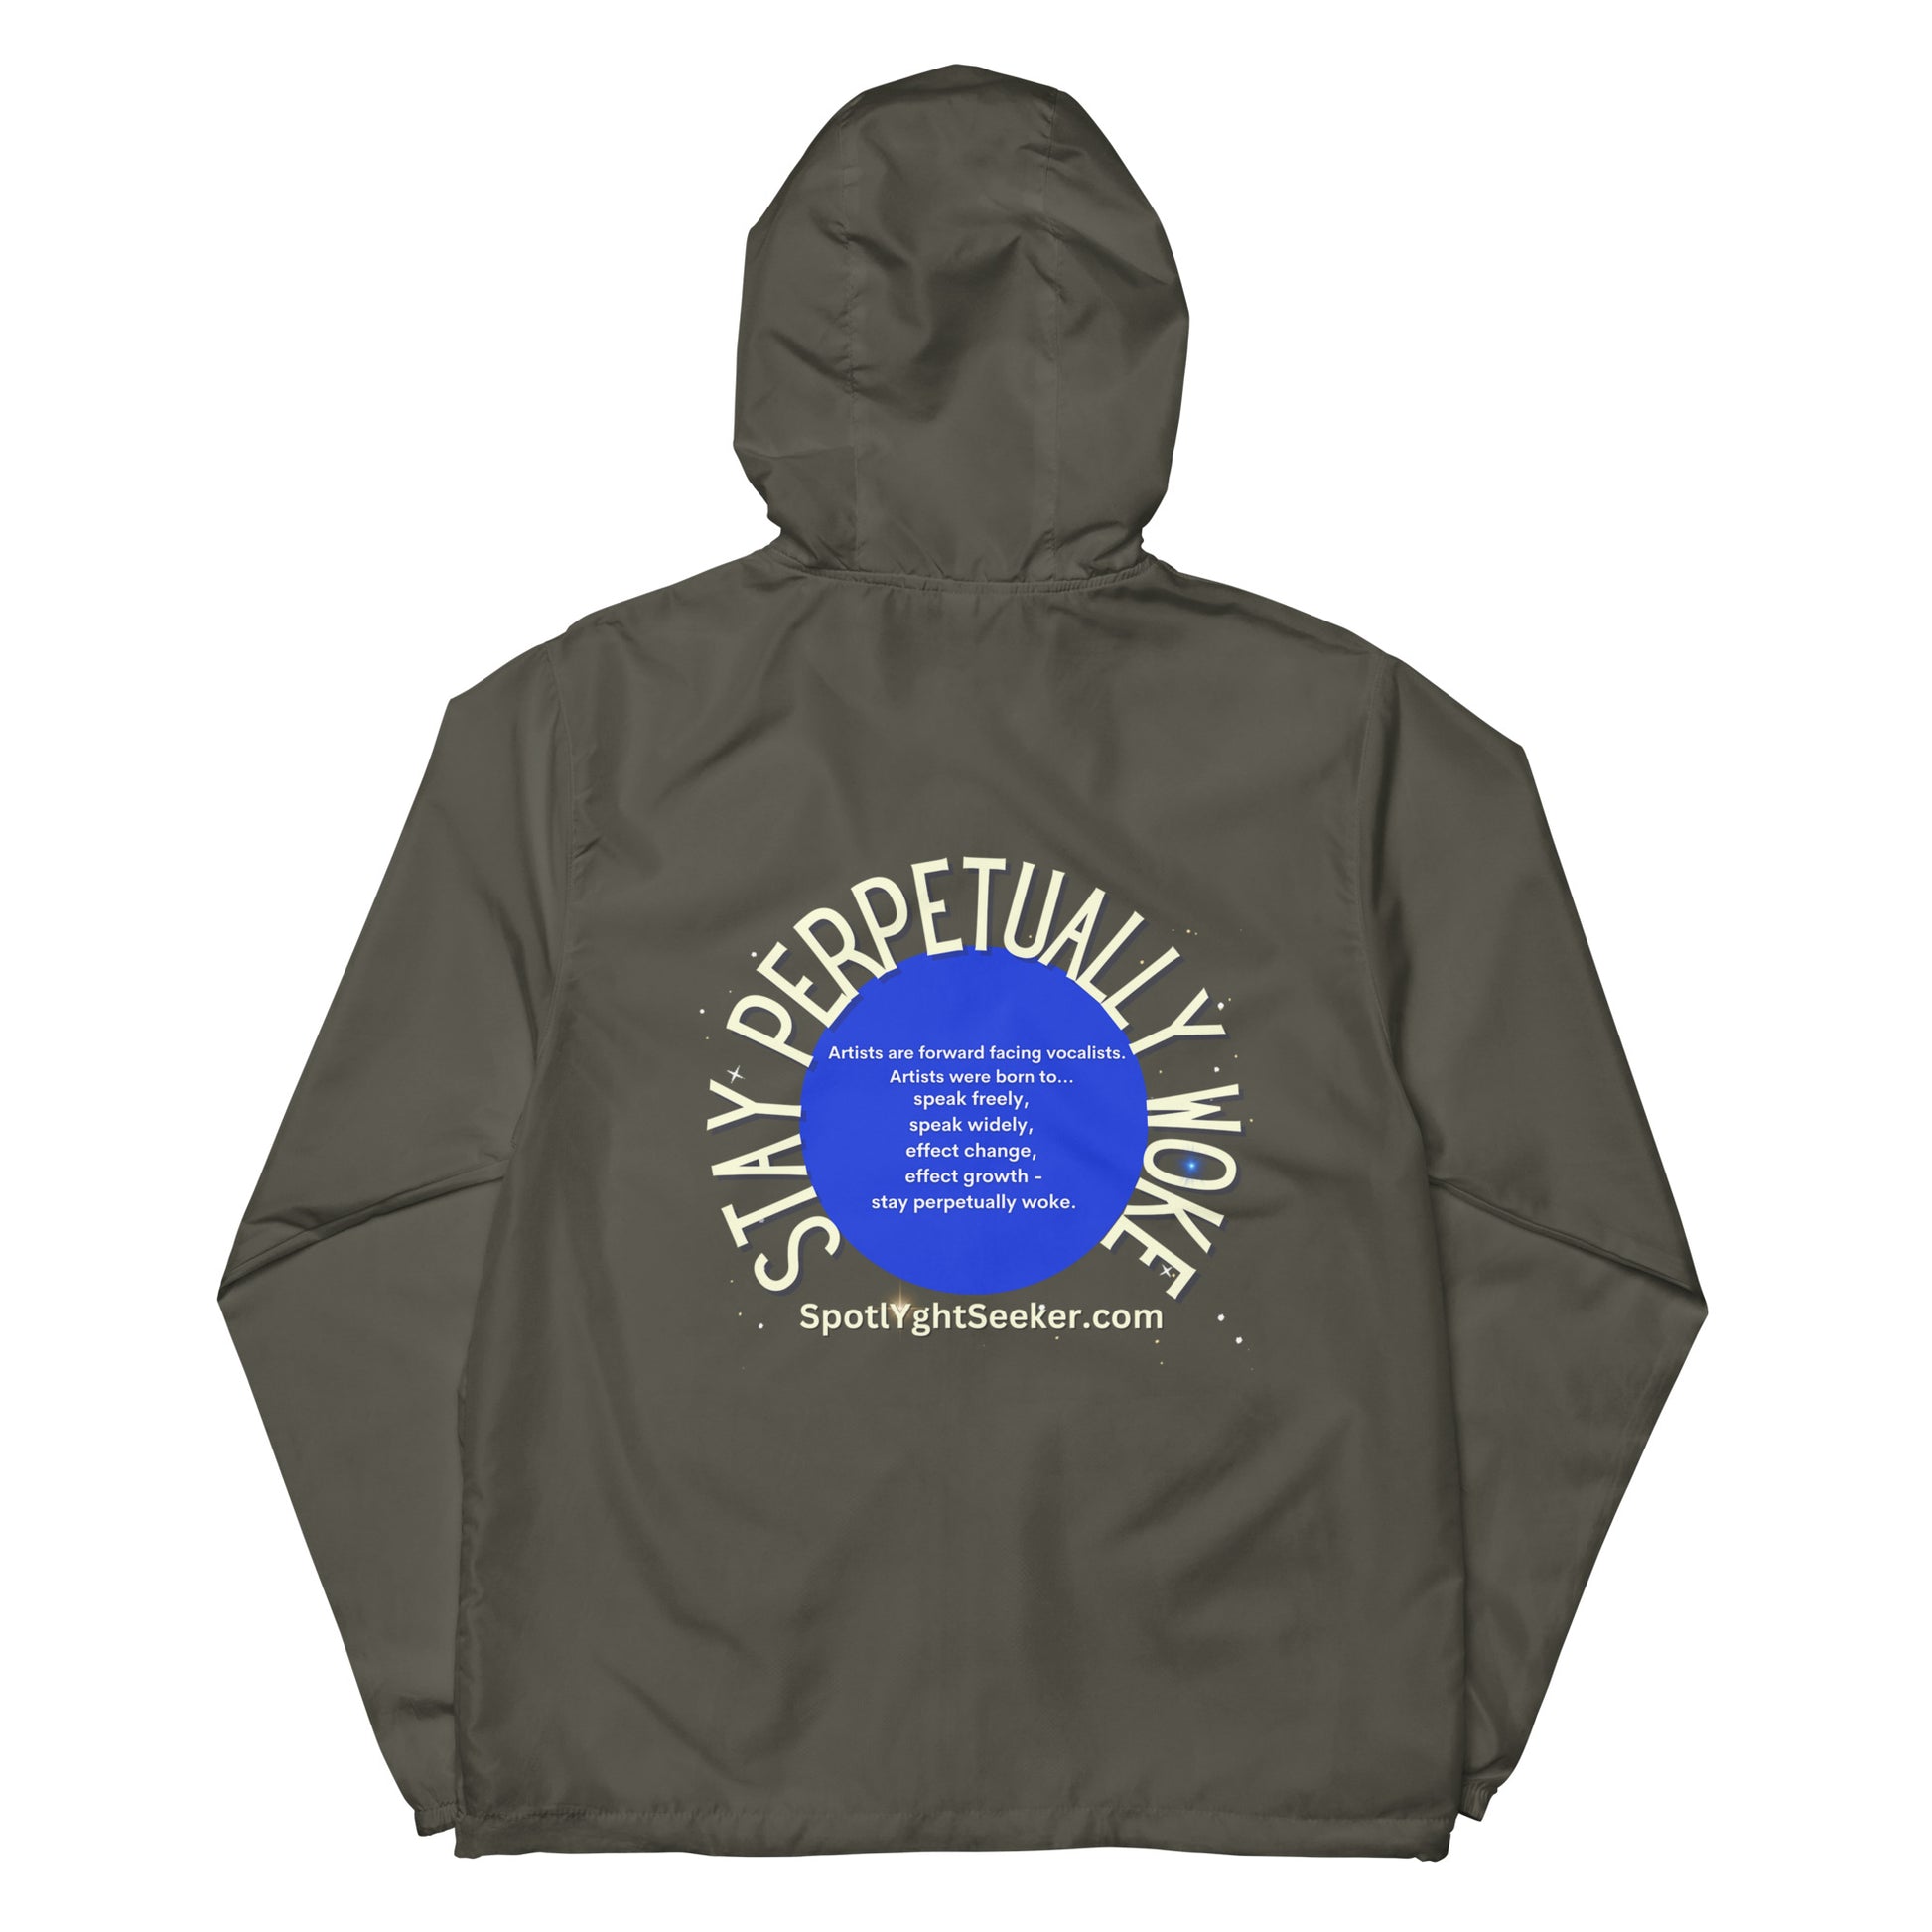 Stay Perpetually Woke' Artist Windbreaker - Embodying creativity, confidence, and artistic expression.